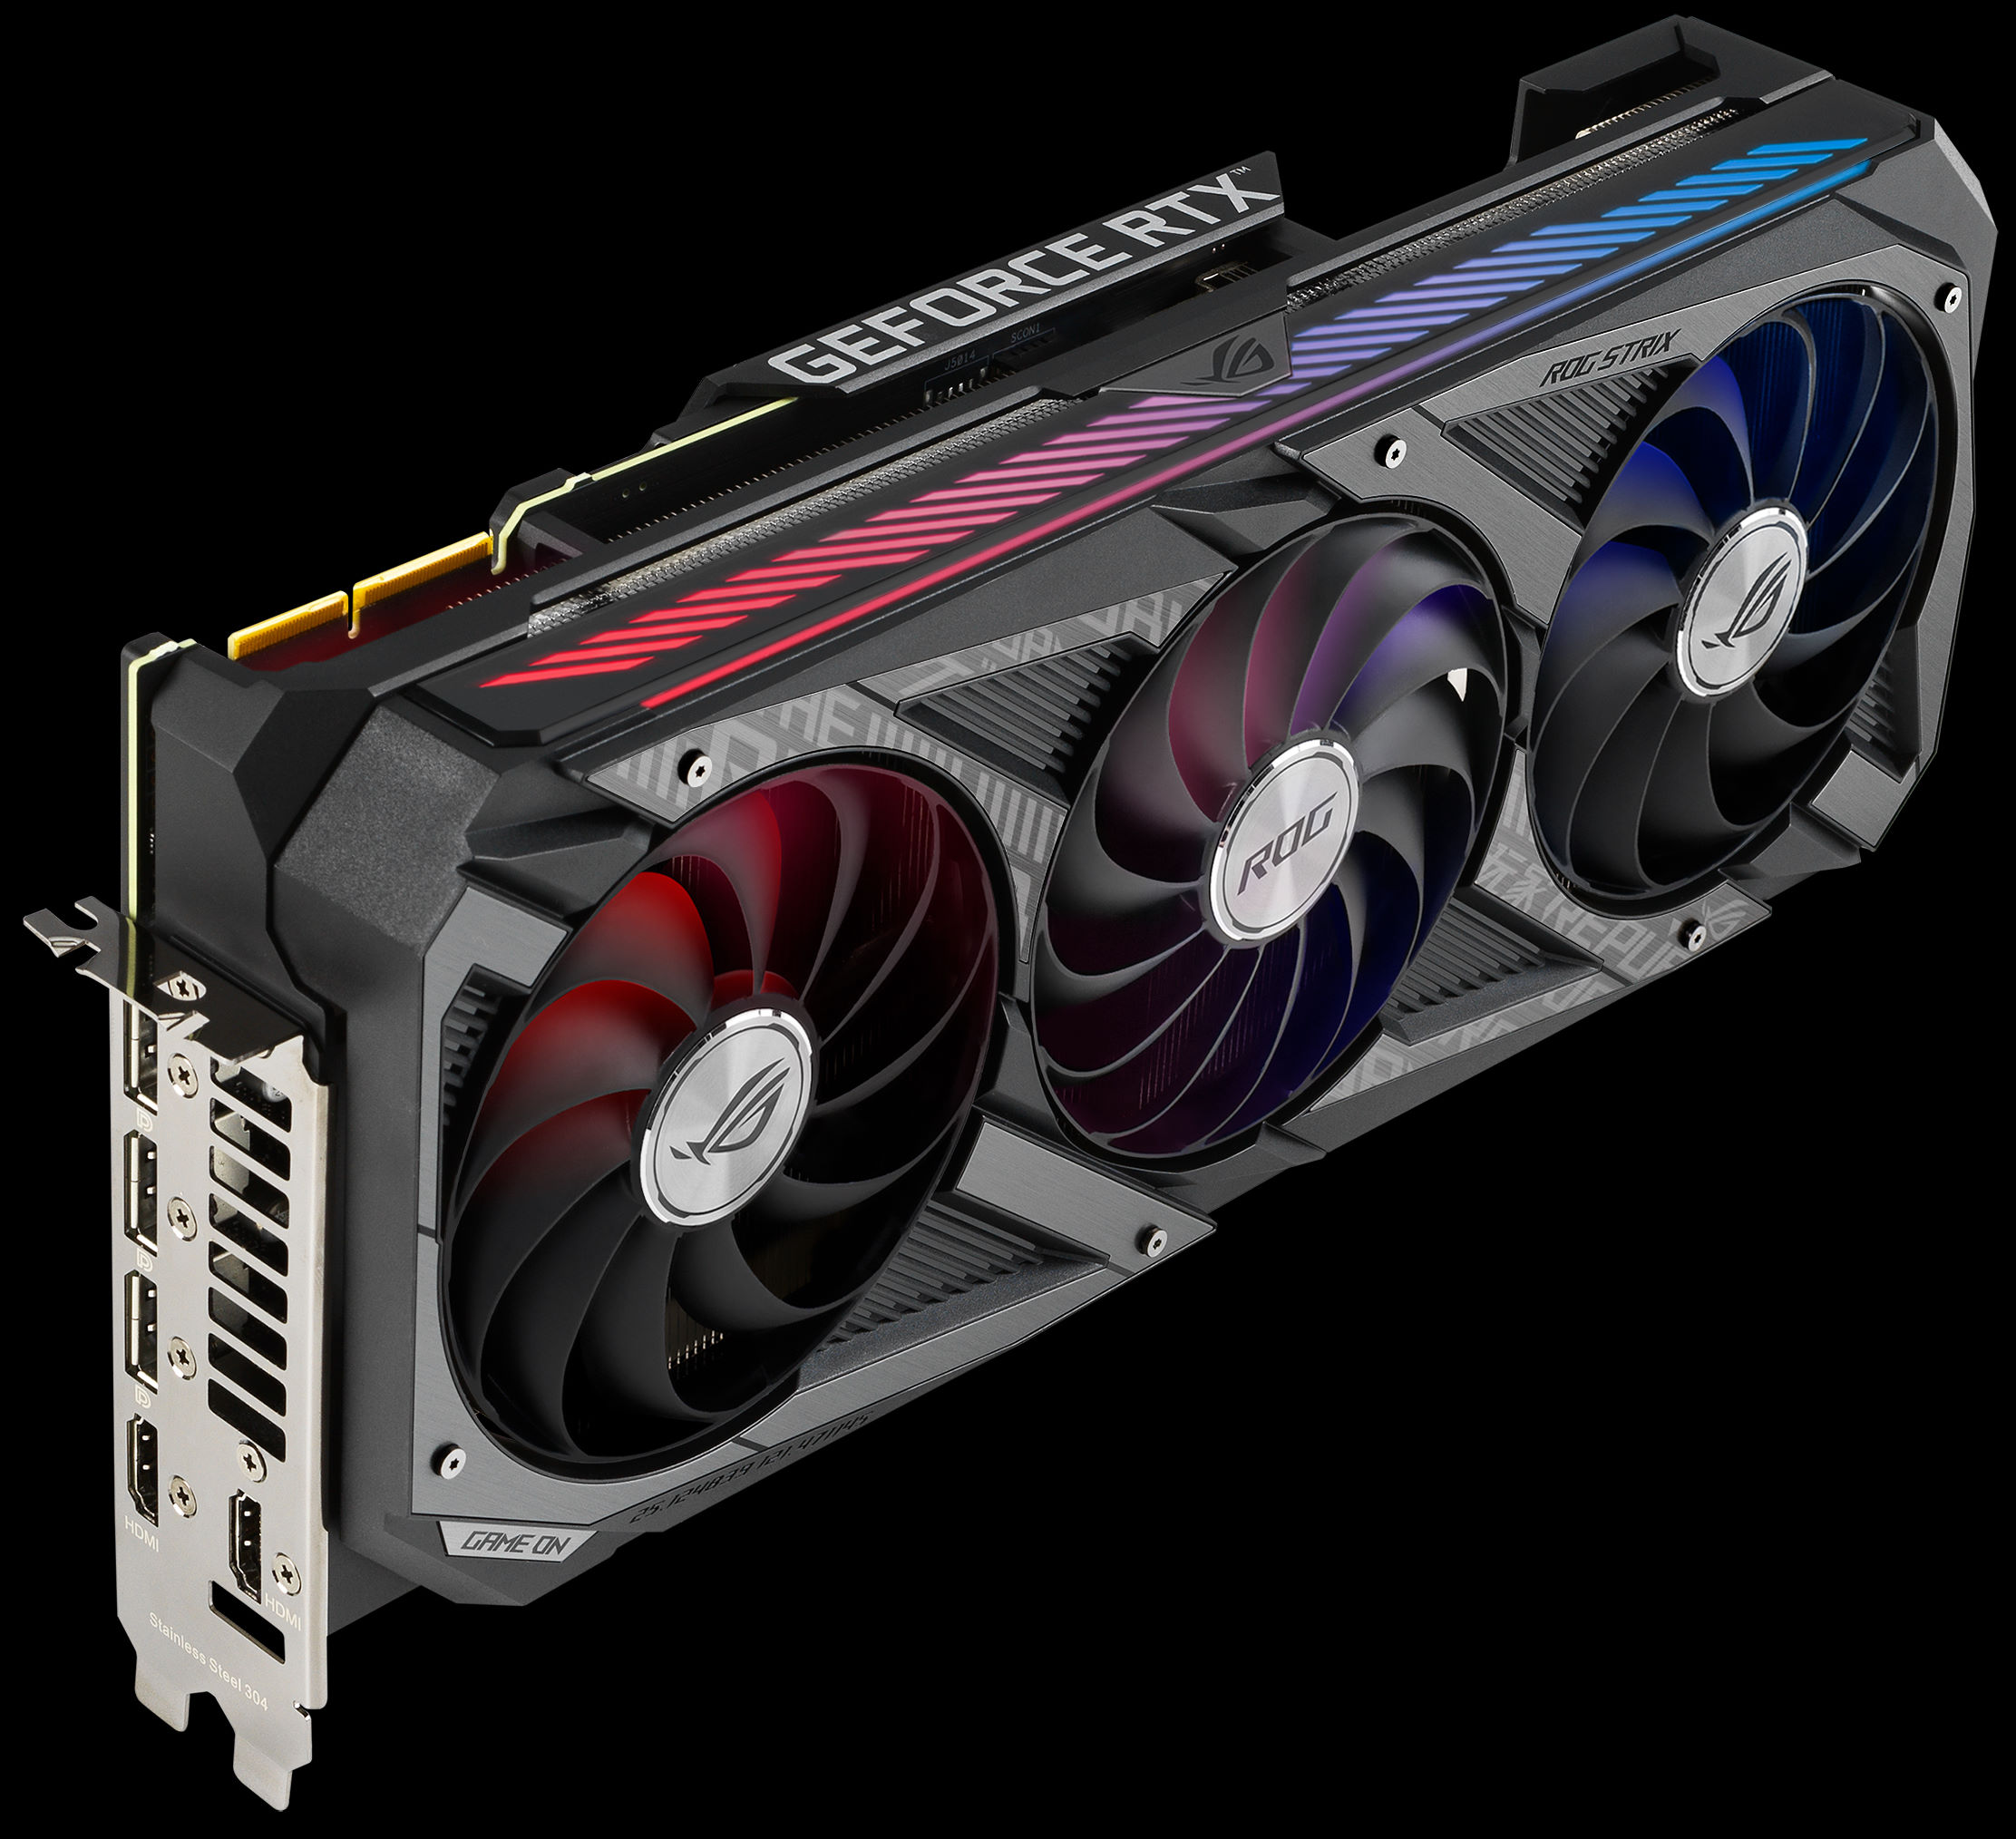 Check out all of our buffed-up GeForce RTX 3070, RTX 3080, and RTX 3090 graphics cards | ROG - Republic of Gamers Global